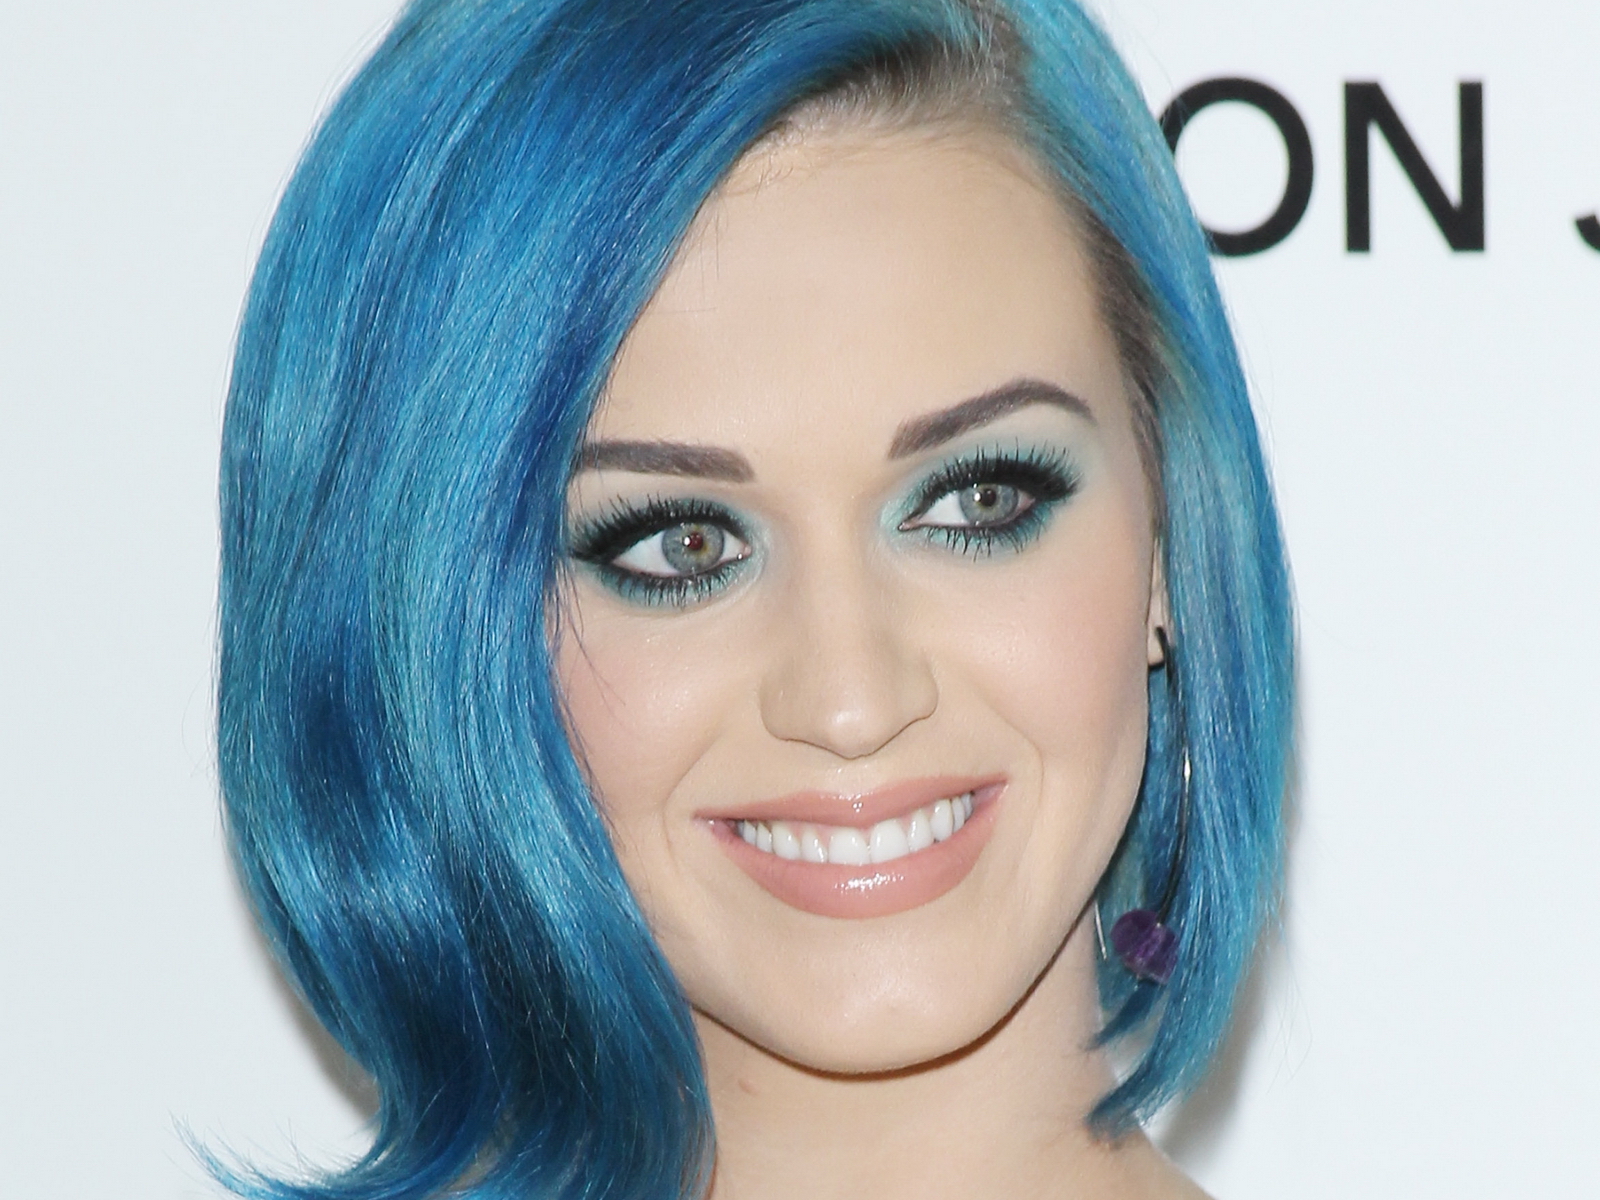 10 Most Famous Girls With Blue Hair | Stillunfold